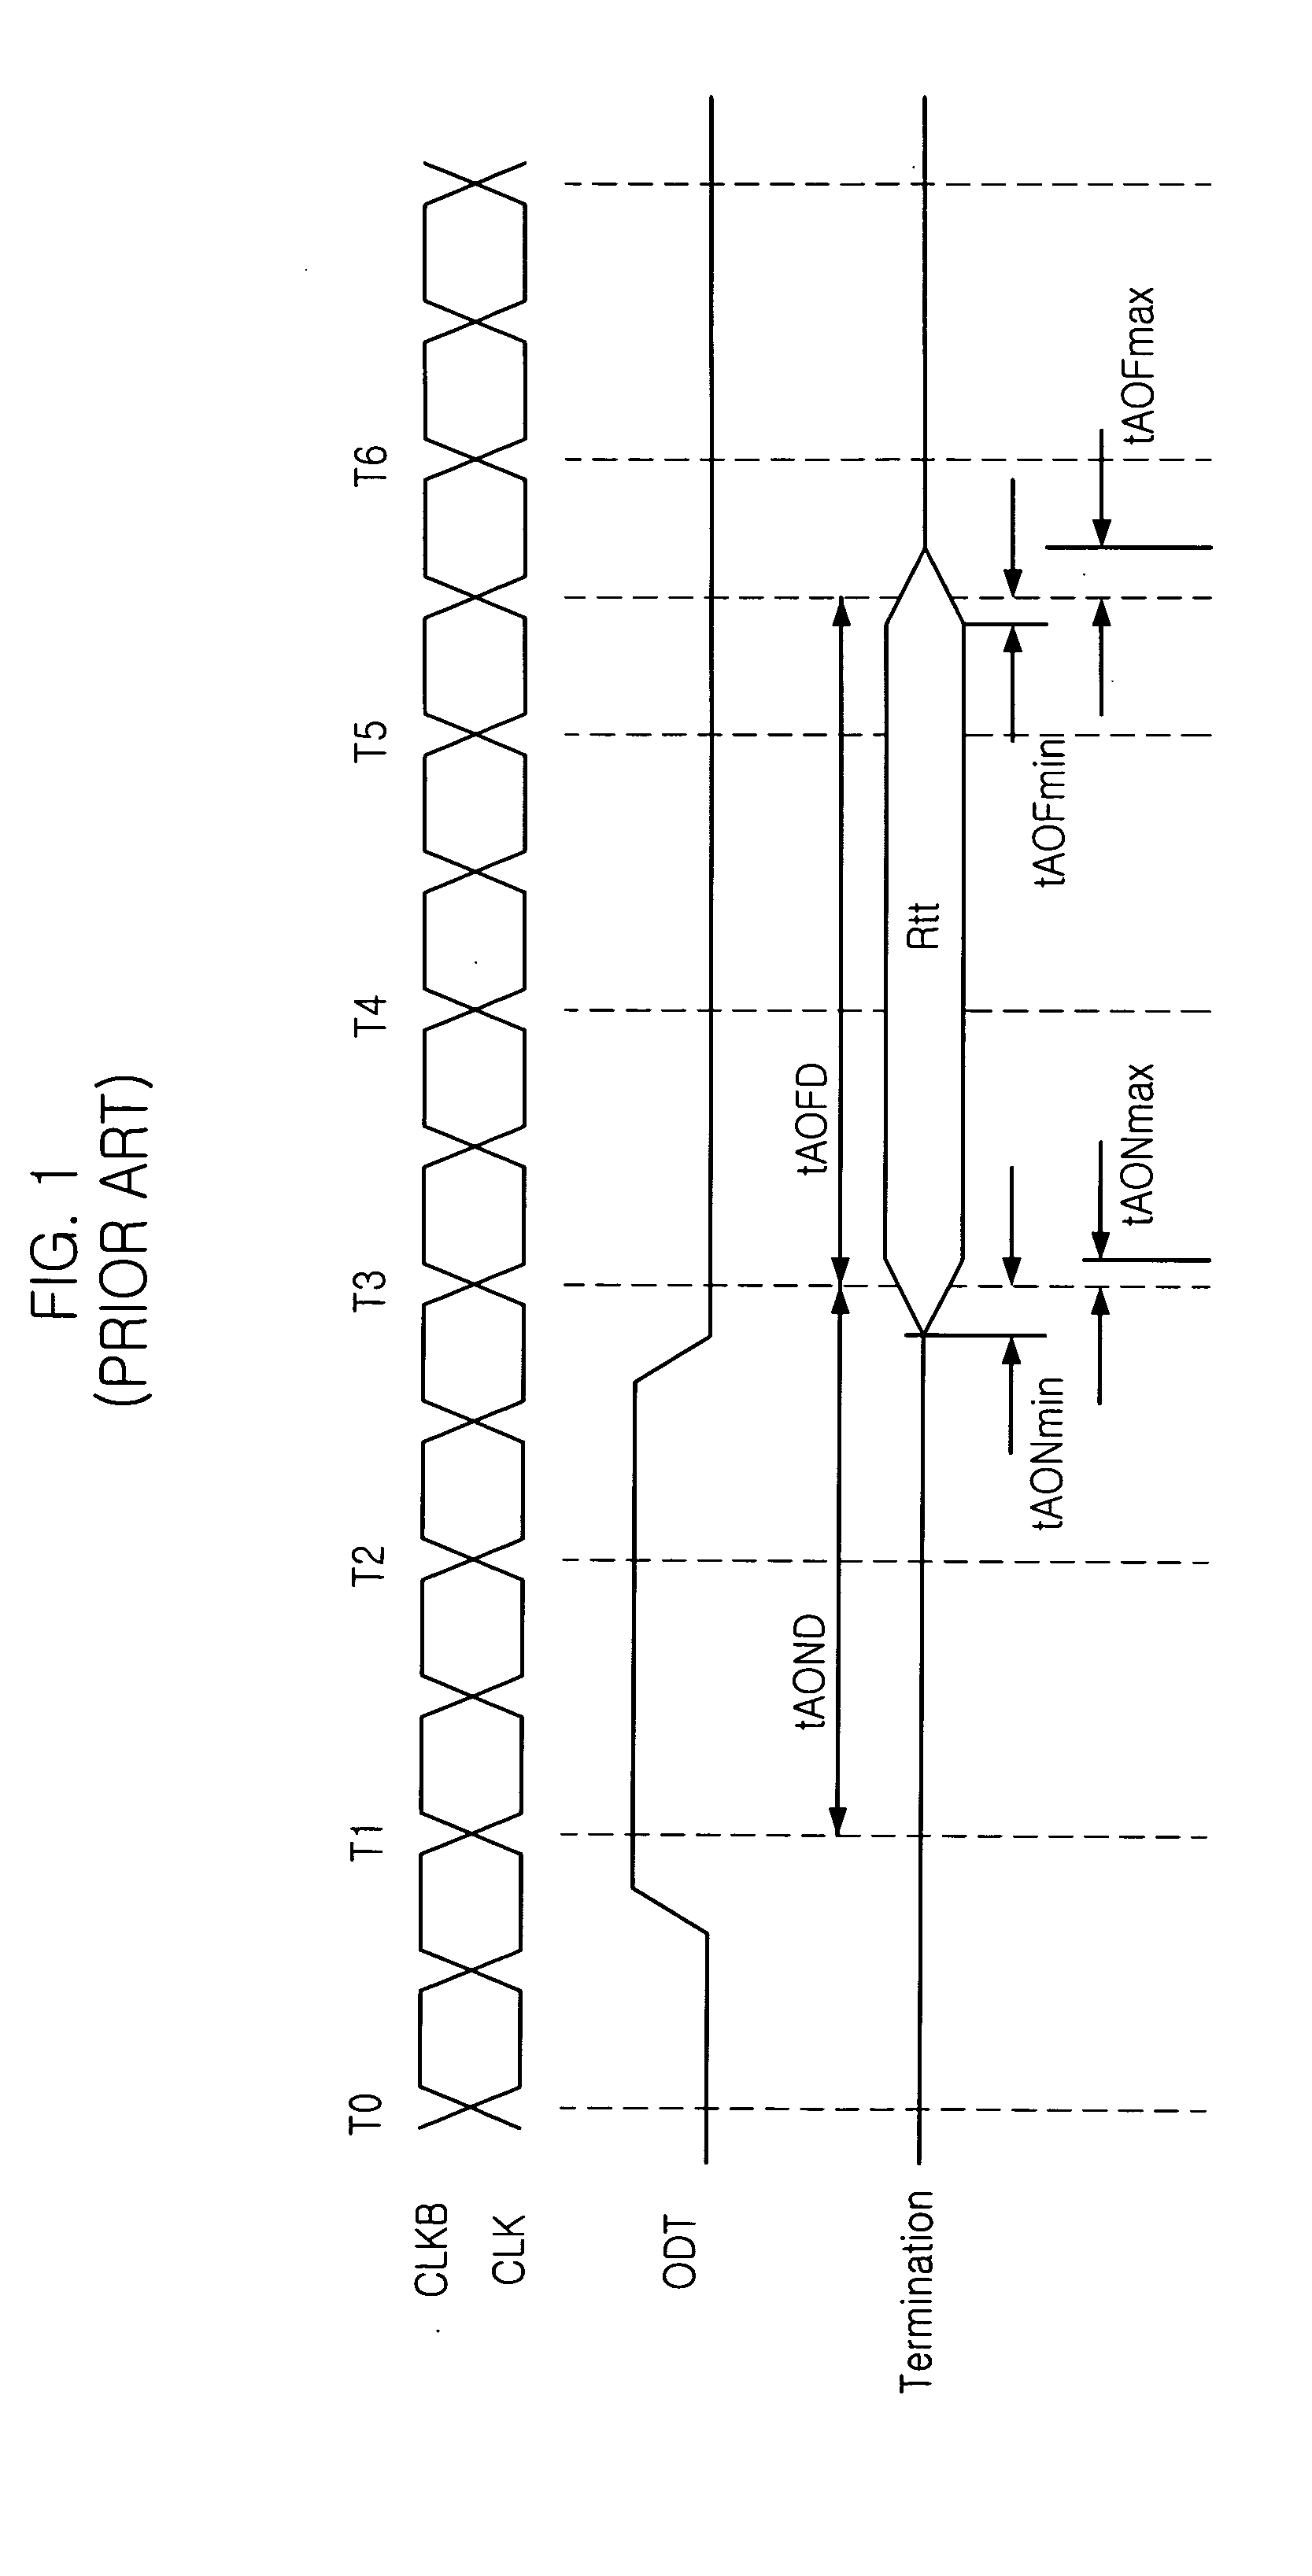 On die termination mode transfer circuit in semiconductor memory device and its method